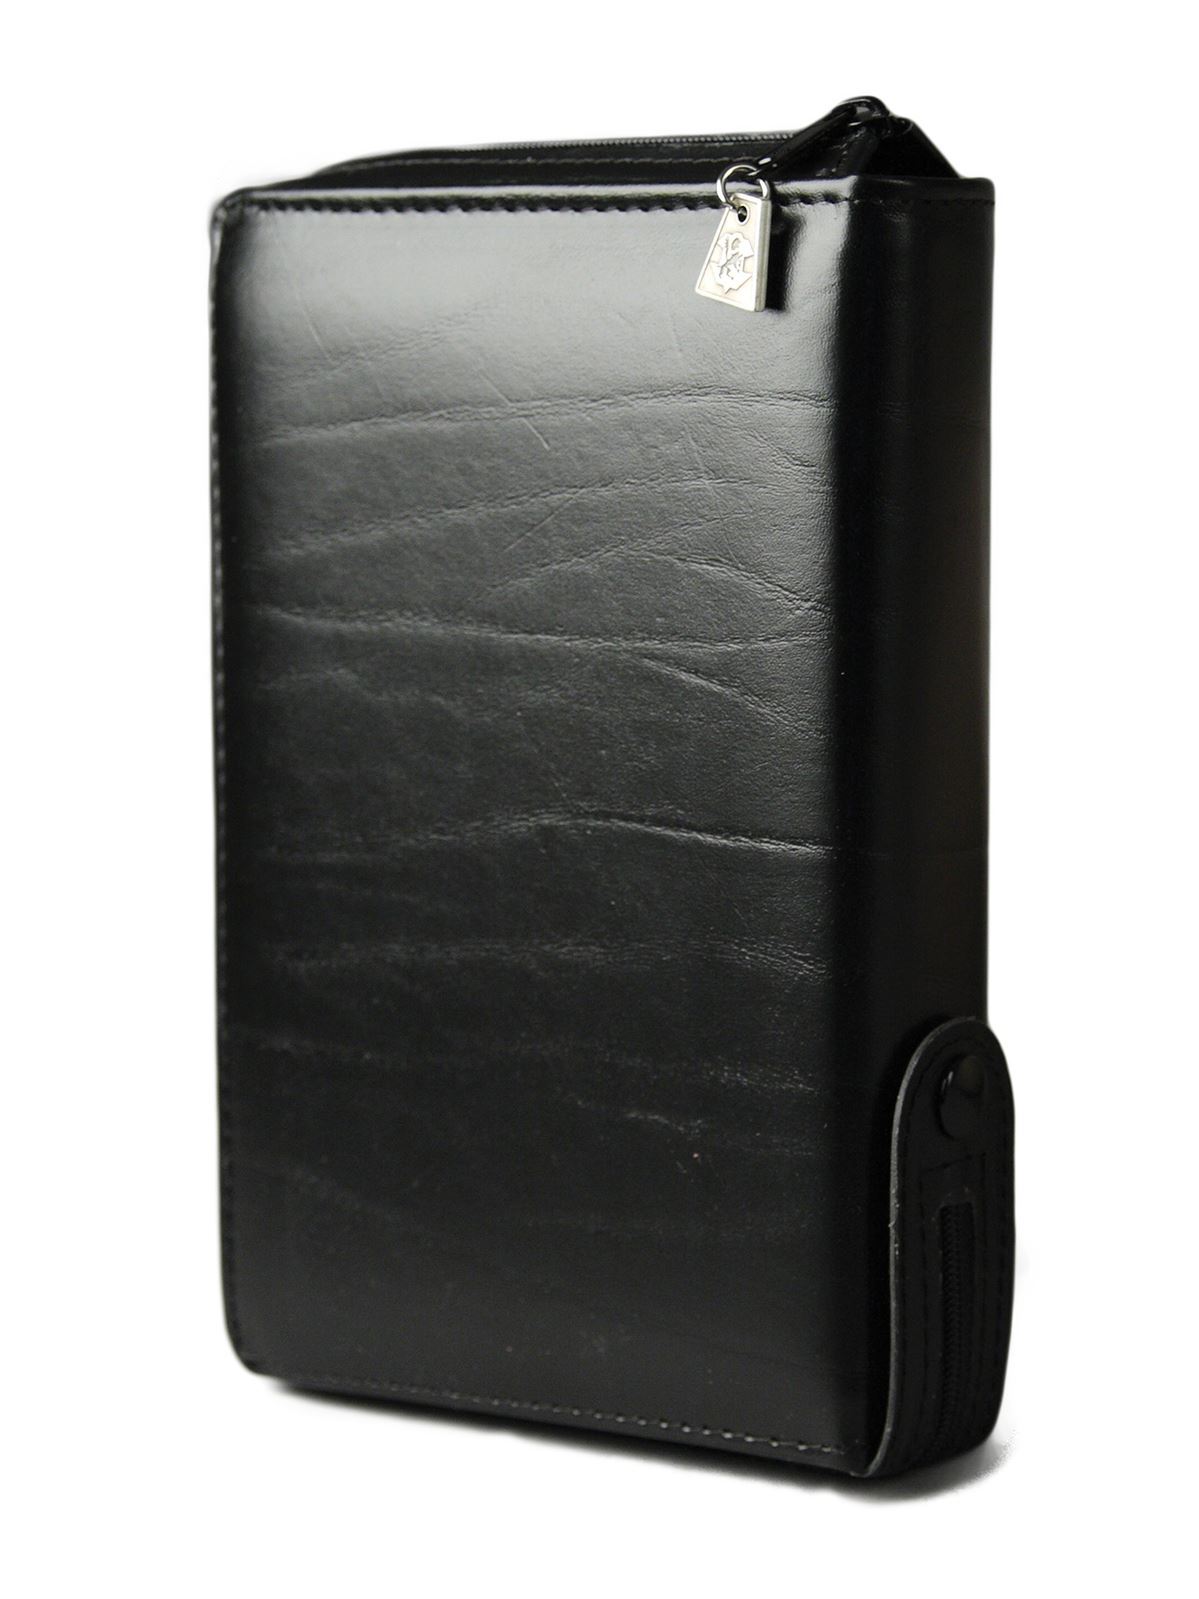 Leather Cover for Sunday Missal with Zipper | Gatto Christian Shop